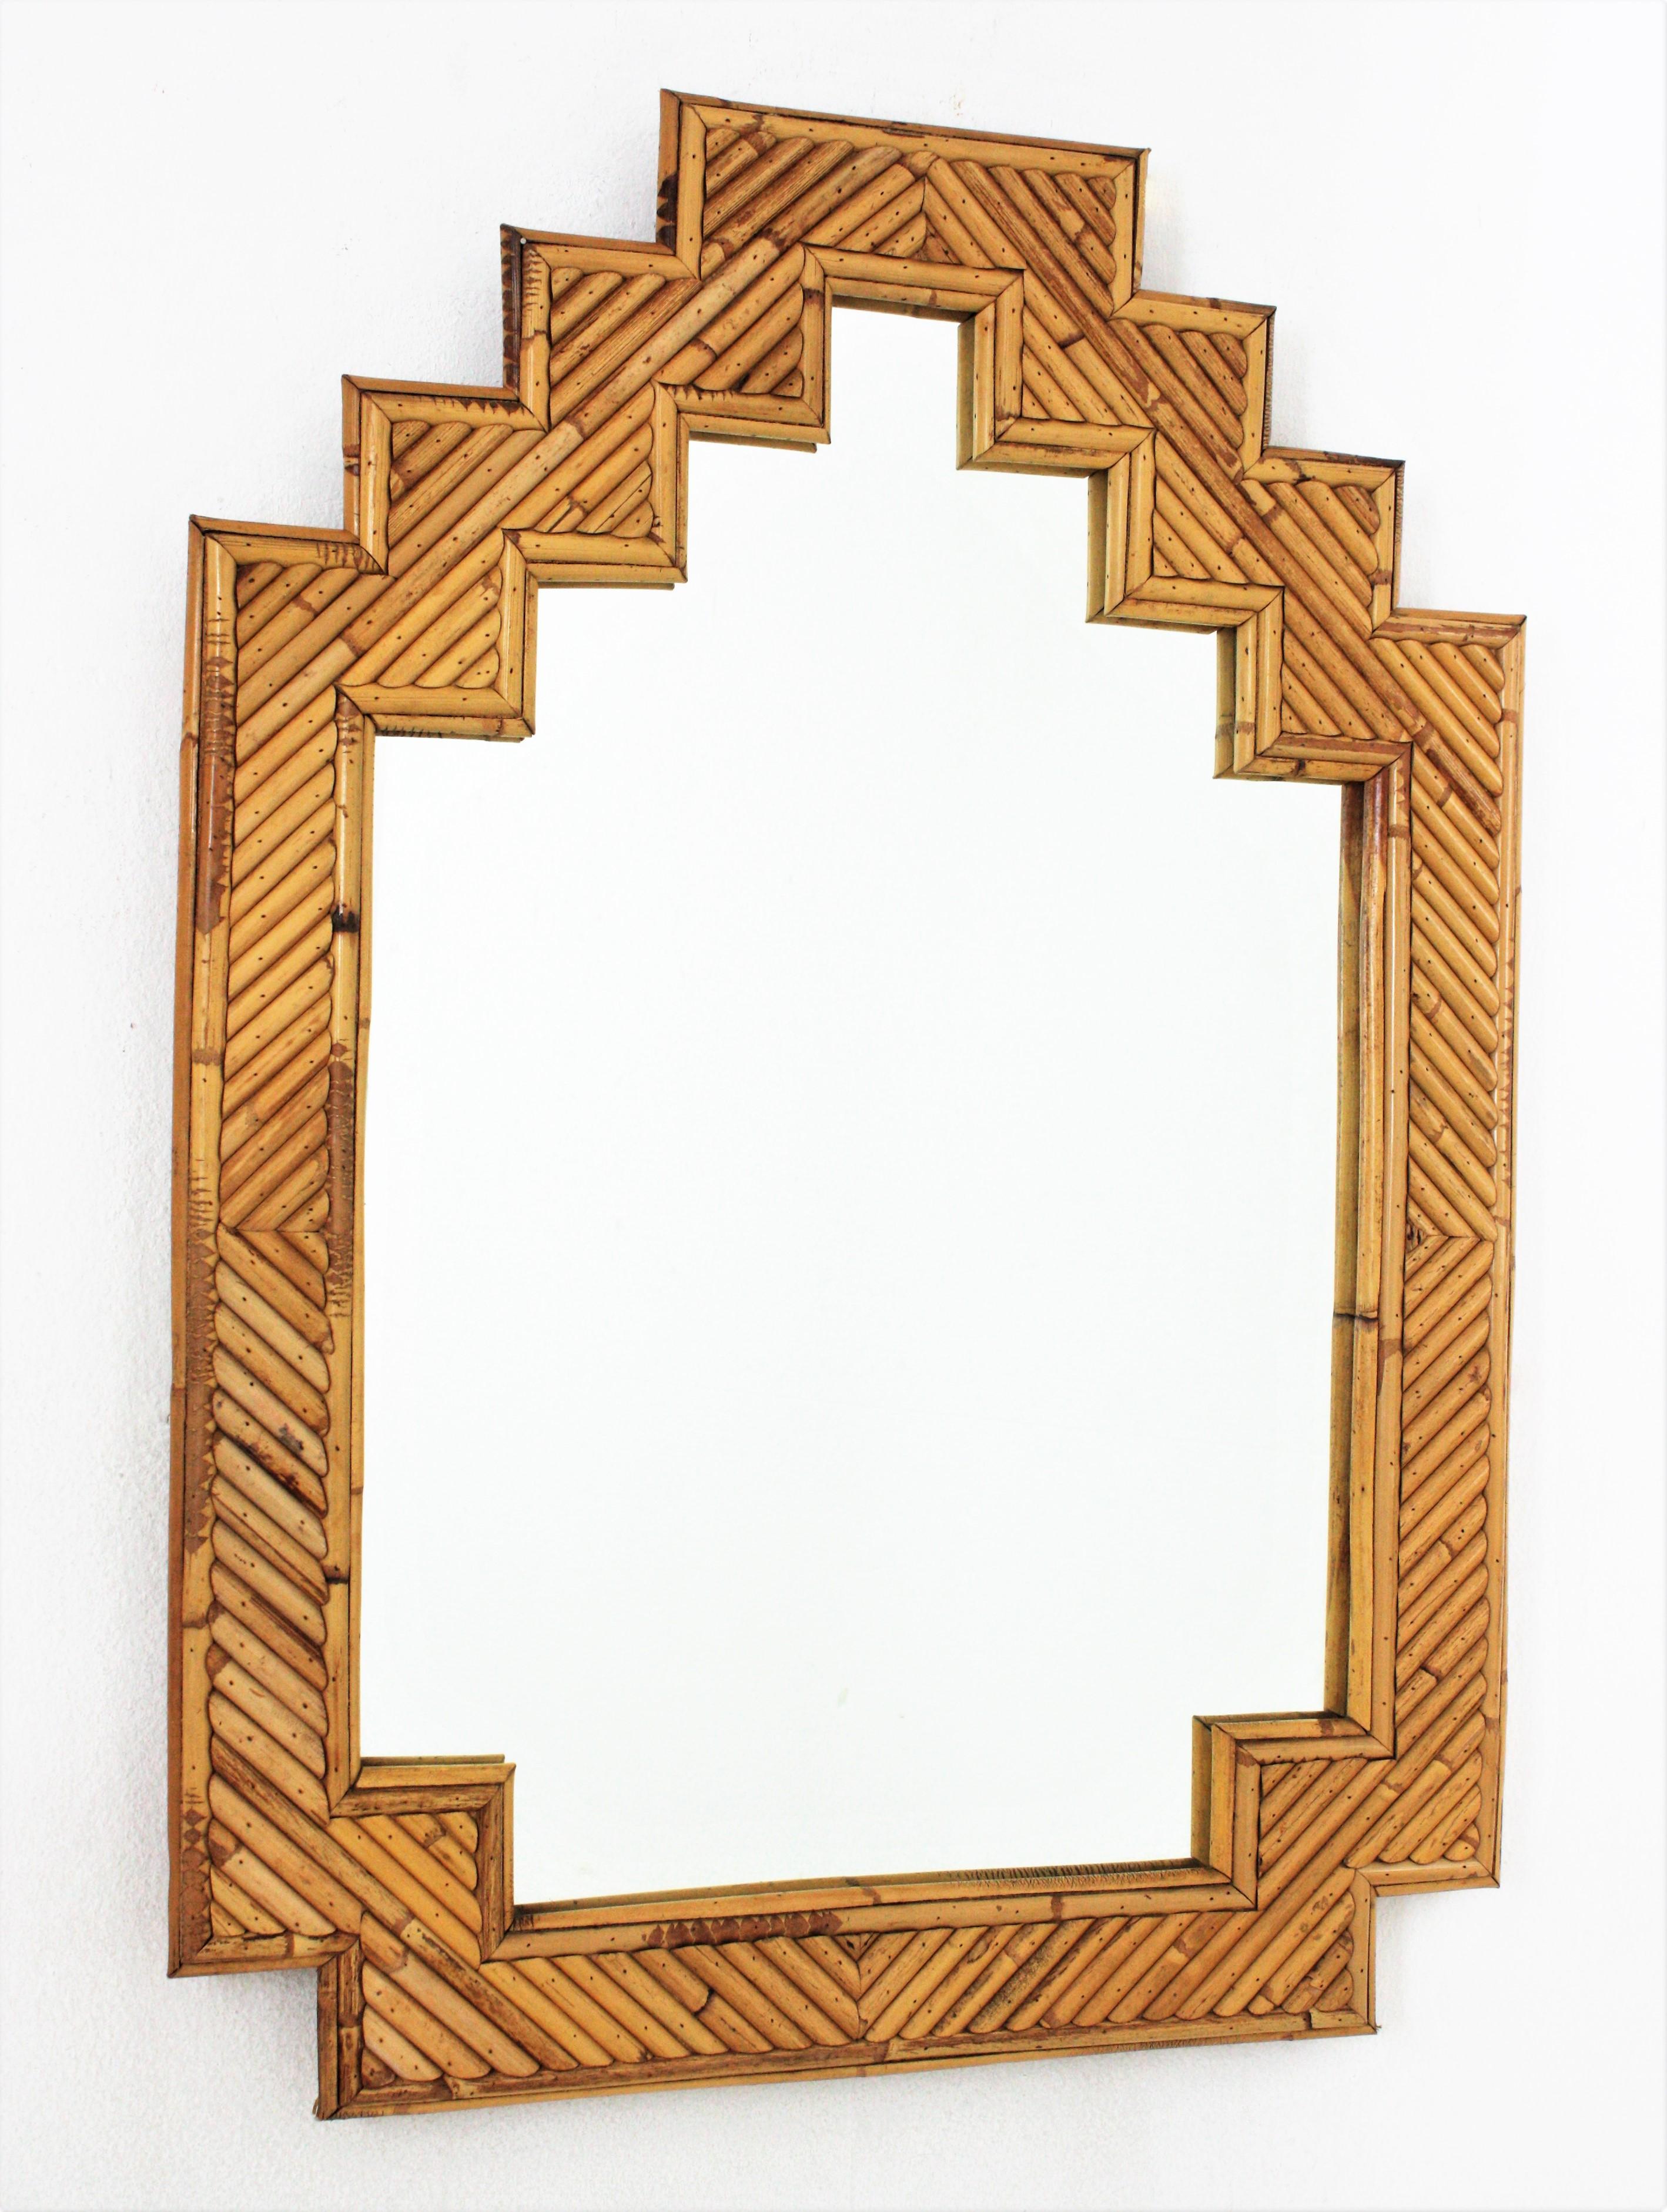 MDM Split Reed Rattan Bamboo Mirror with Staggered Top. Attributed to Vivai del Sud. Italy, 1960s.
Its design combines Midcentury and Oriental accents.
It will be a nice addition to be used in a bathroom or as wall mirror / console mirror in any